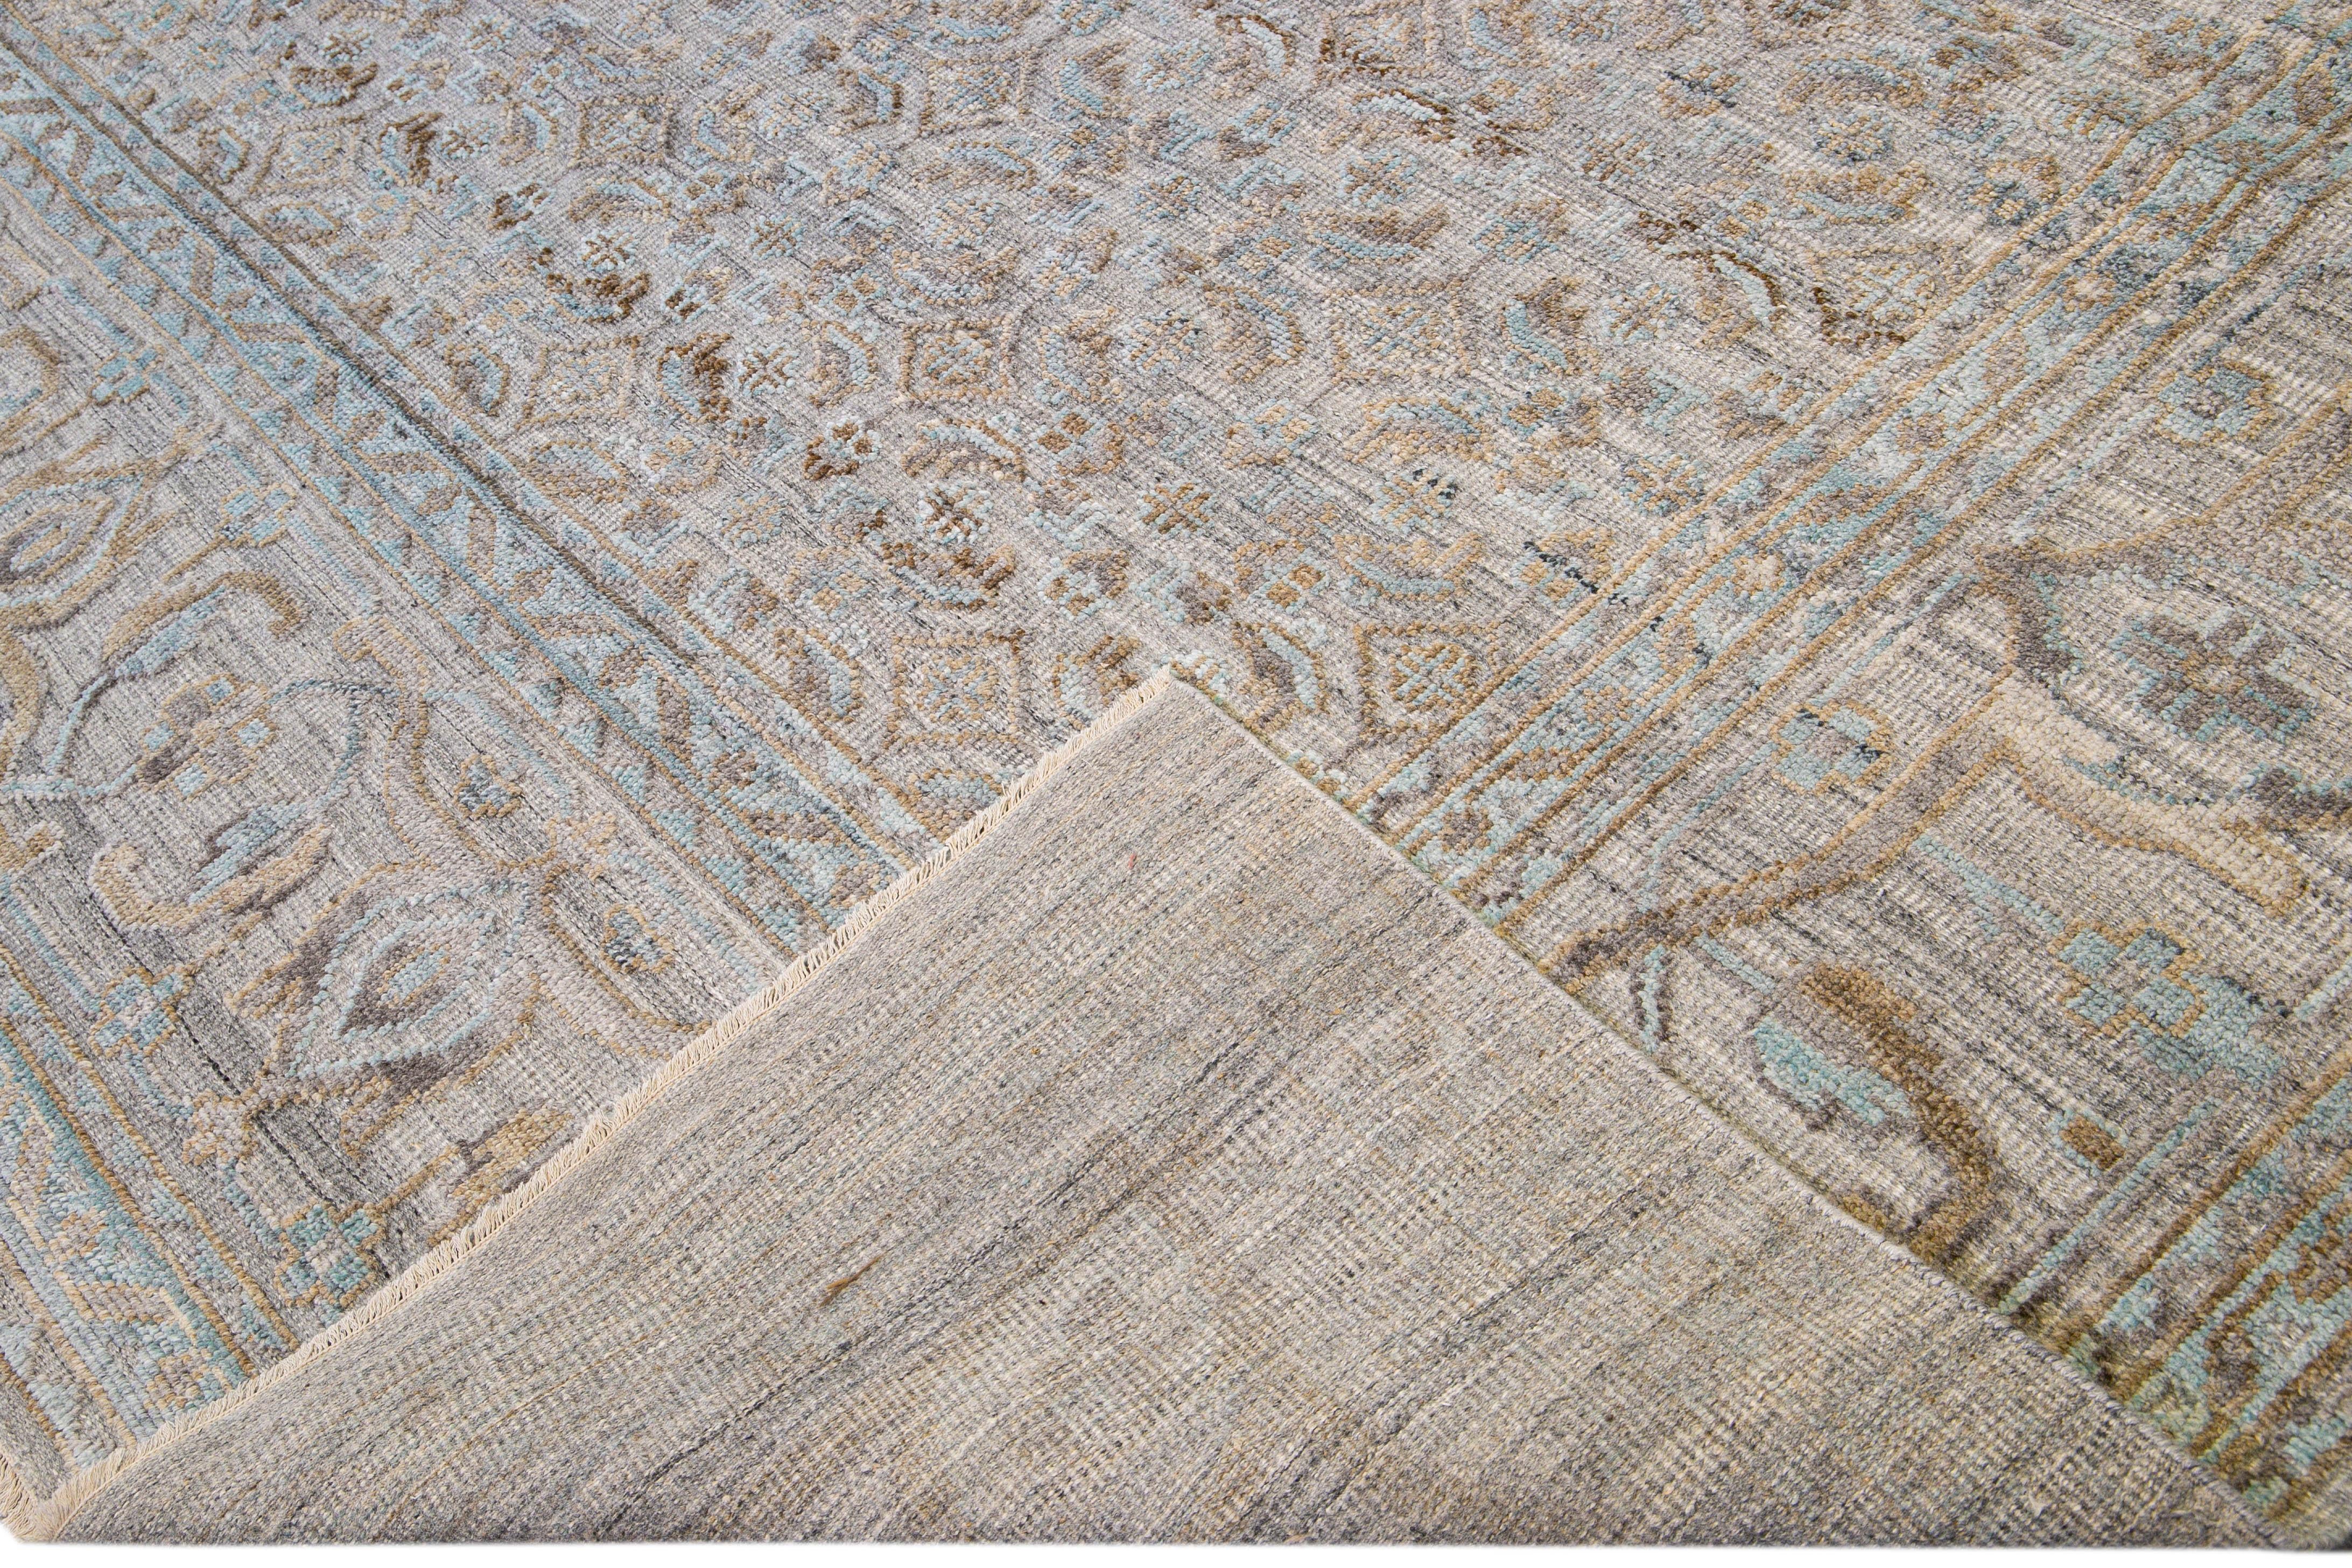 Beautiful modern hand-knotted wool rug with a beige field. This Transitional rug has blue, gray, and brown accents to create a modern all-over floral pattern design with a mid-century look. 

This rug measures: 11'10